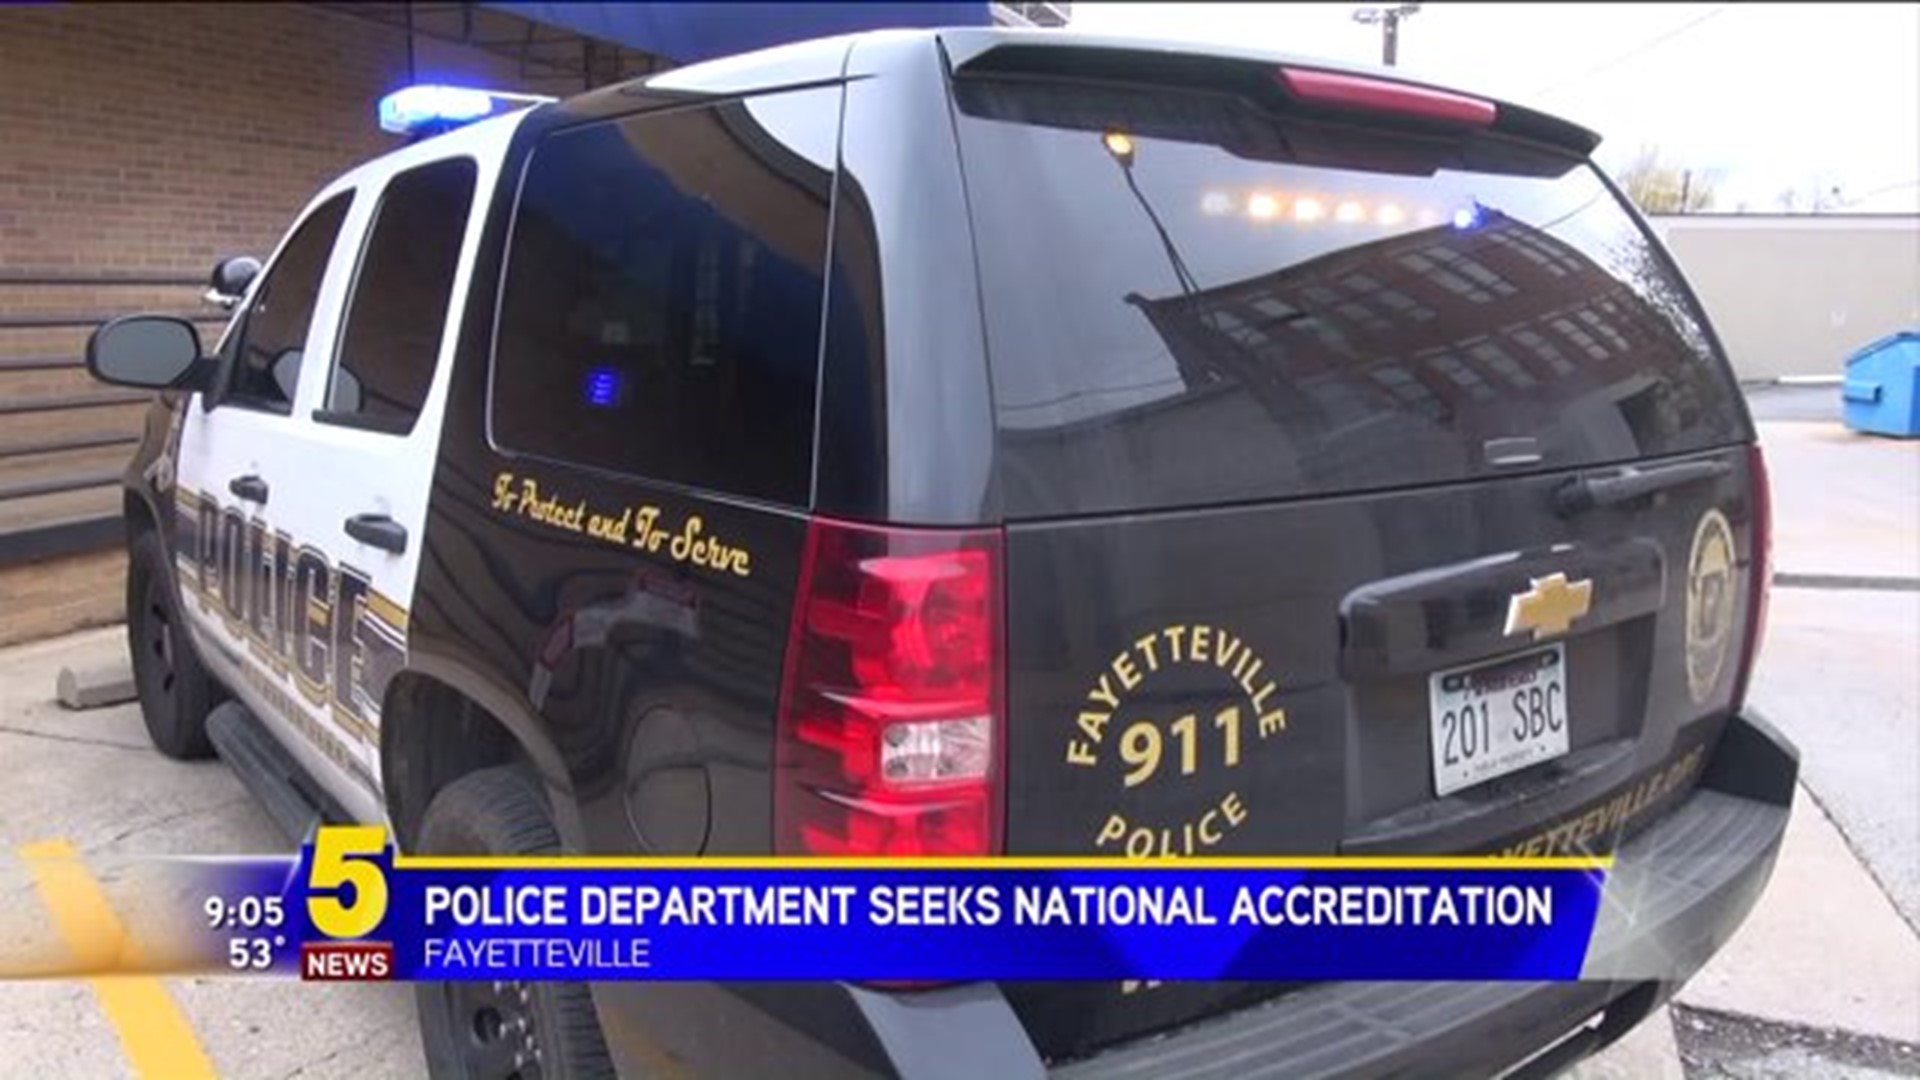 Fayetteville Police Department Seeks Re-Accreditation